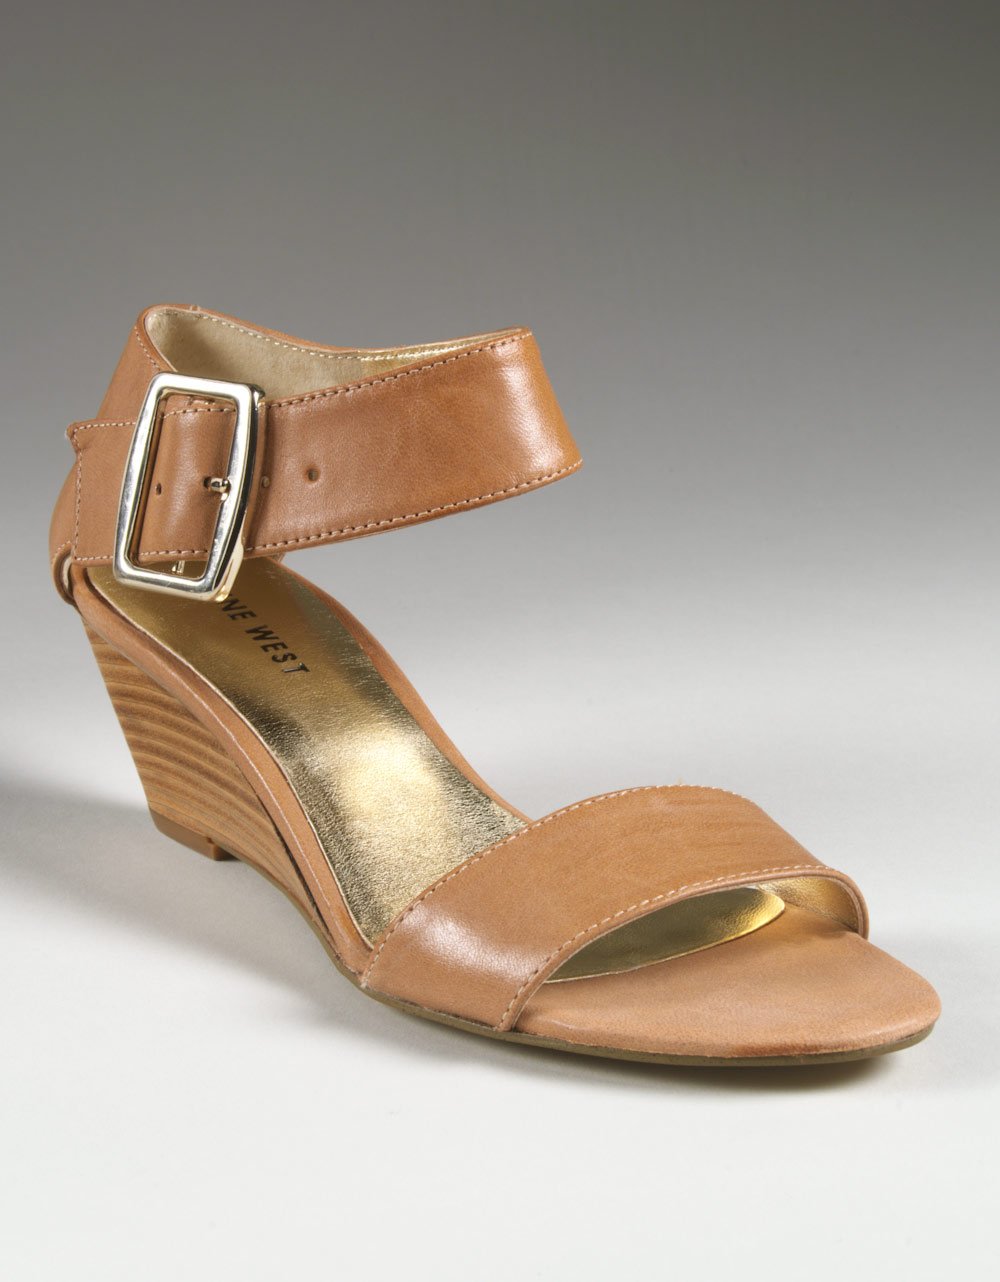 Nine West Punchy Leather Wedge Sandals in Brown (tan leather) | Lyst